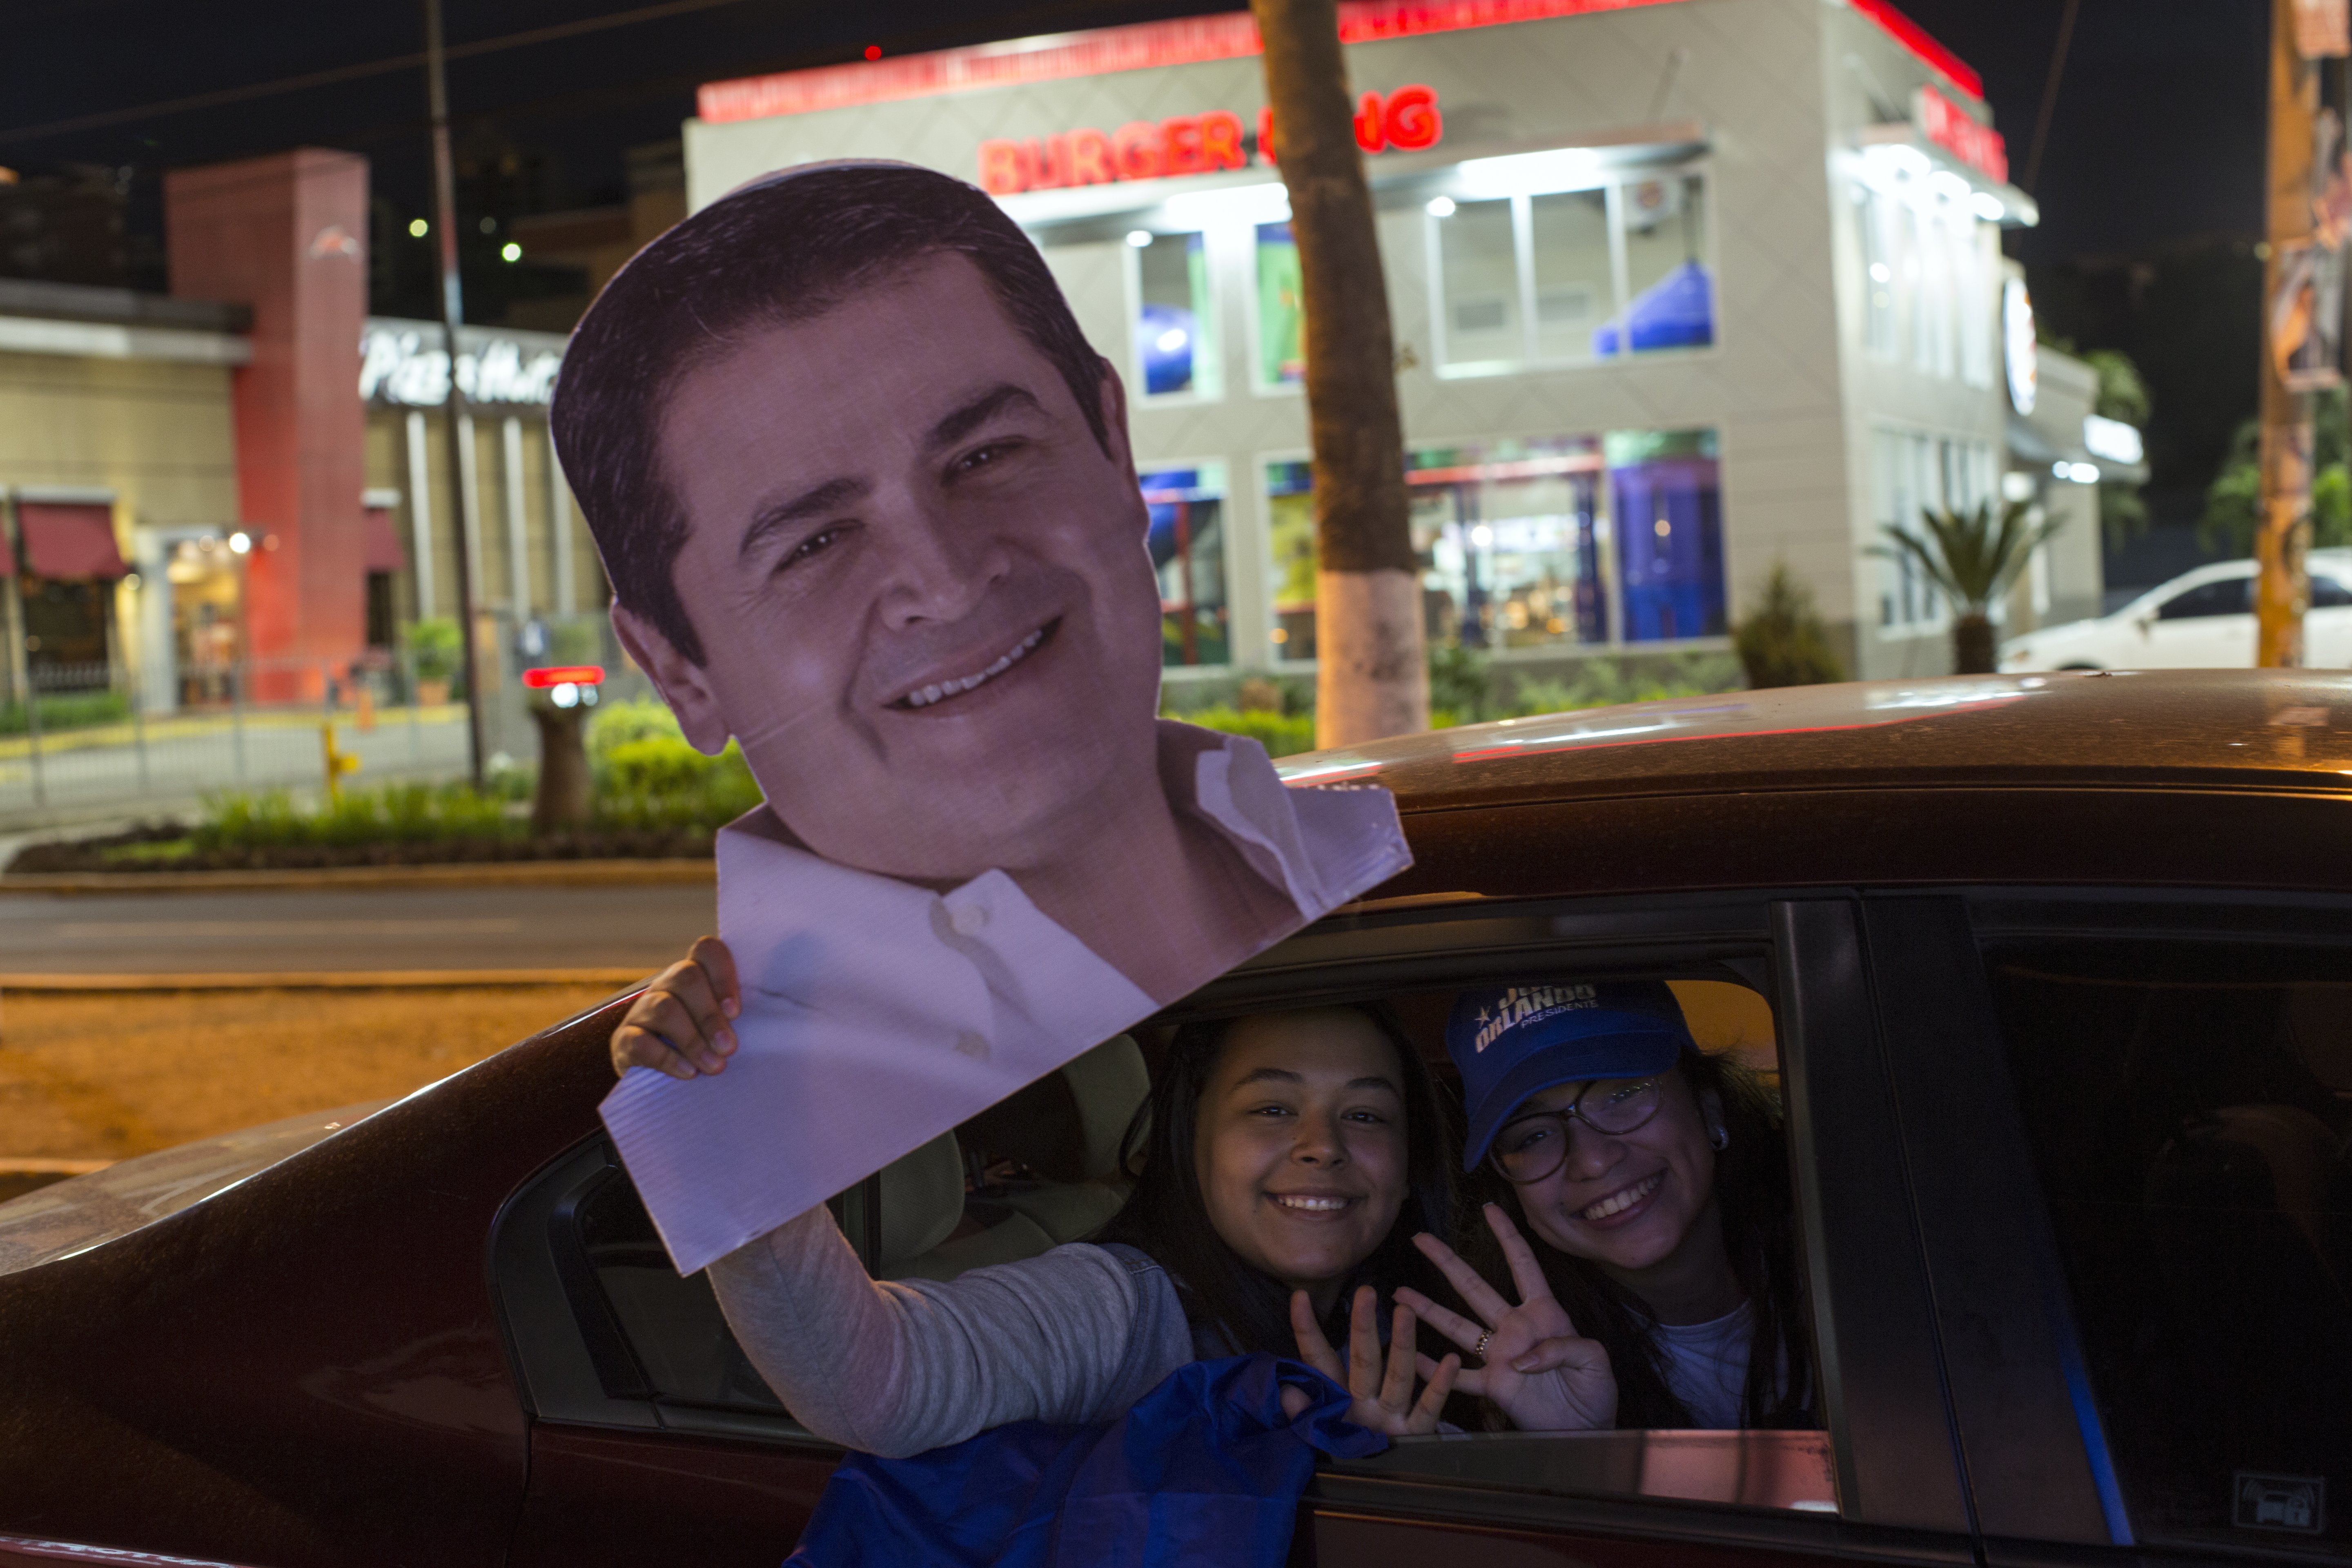 Supporters of Honduran President Juan Orlando Hernandez, who is running for reelection, show support for their candidate as they caravan through Tegucigalpa, Honduras, Wednesday, Nov. 29, 2017. Both Hernandez and his rival Salvador Nasralla have declared themselves the winner of Sunday's presidential election, but the electoral court has not announced the final results. (AP Photo/Rodrigo Abd)